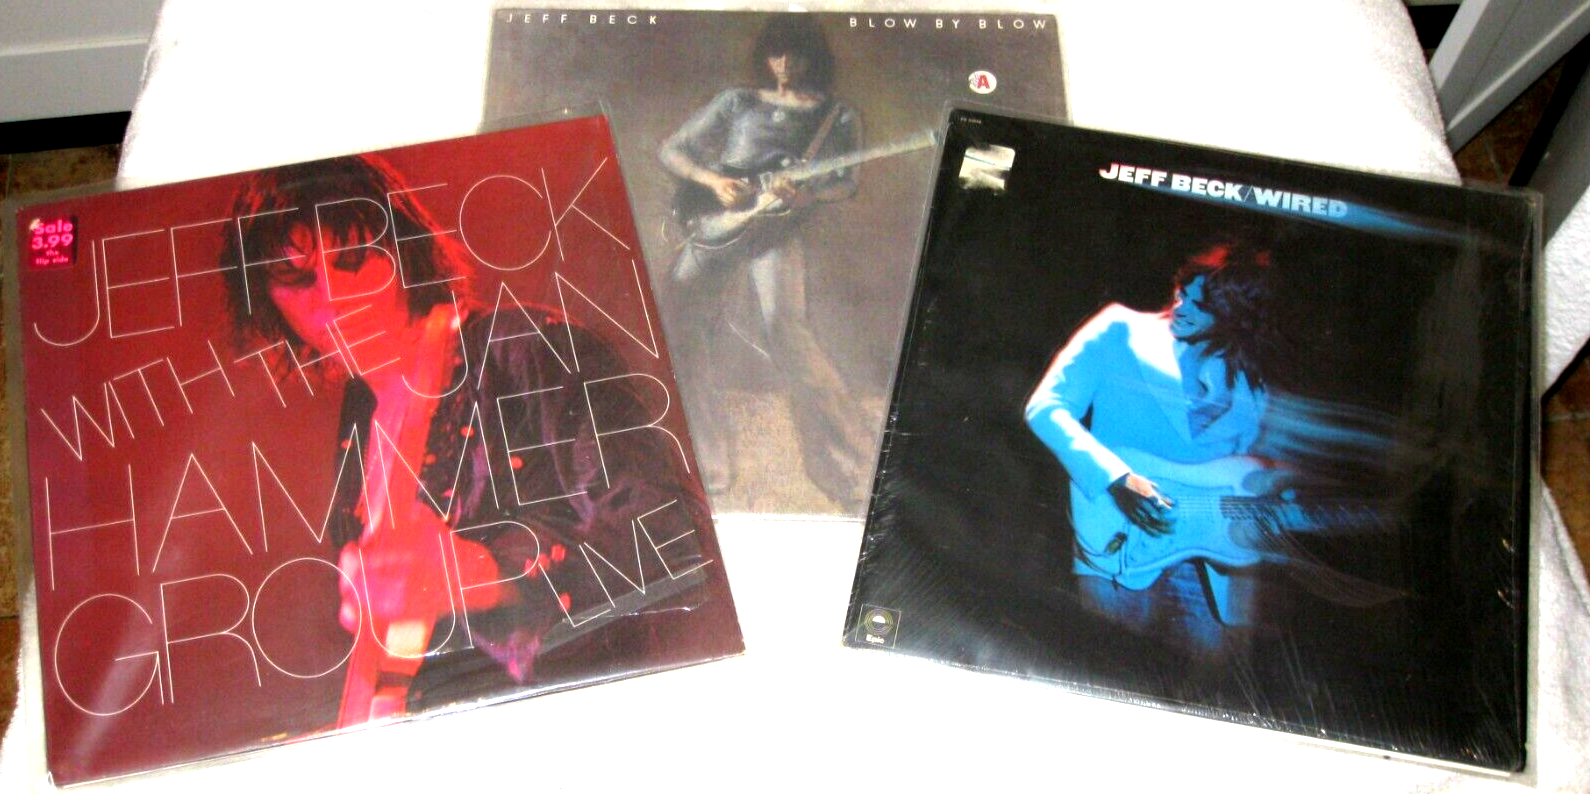 Jeff Beck Group- Blow By Blow- Wired- Jan Hammer-Original LP In Shrink -EX To NM